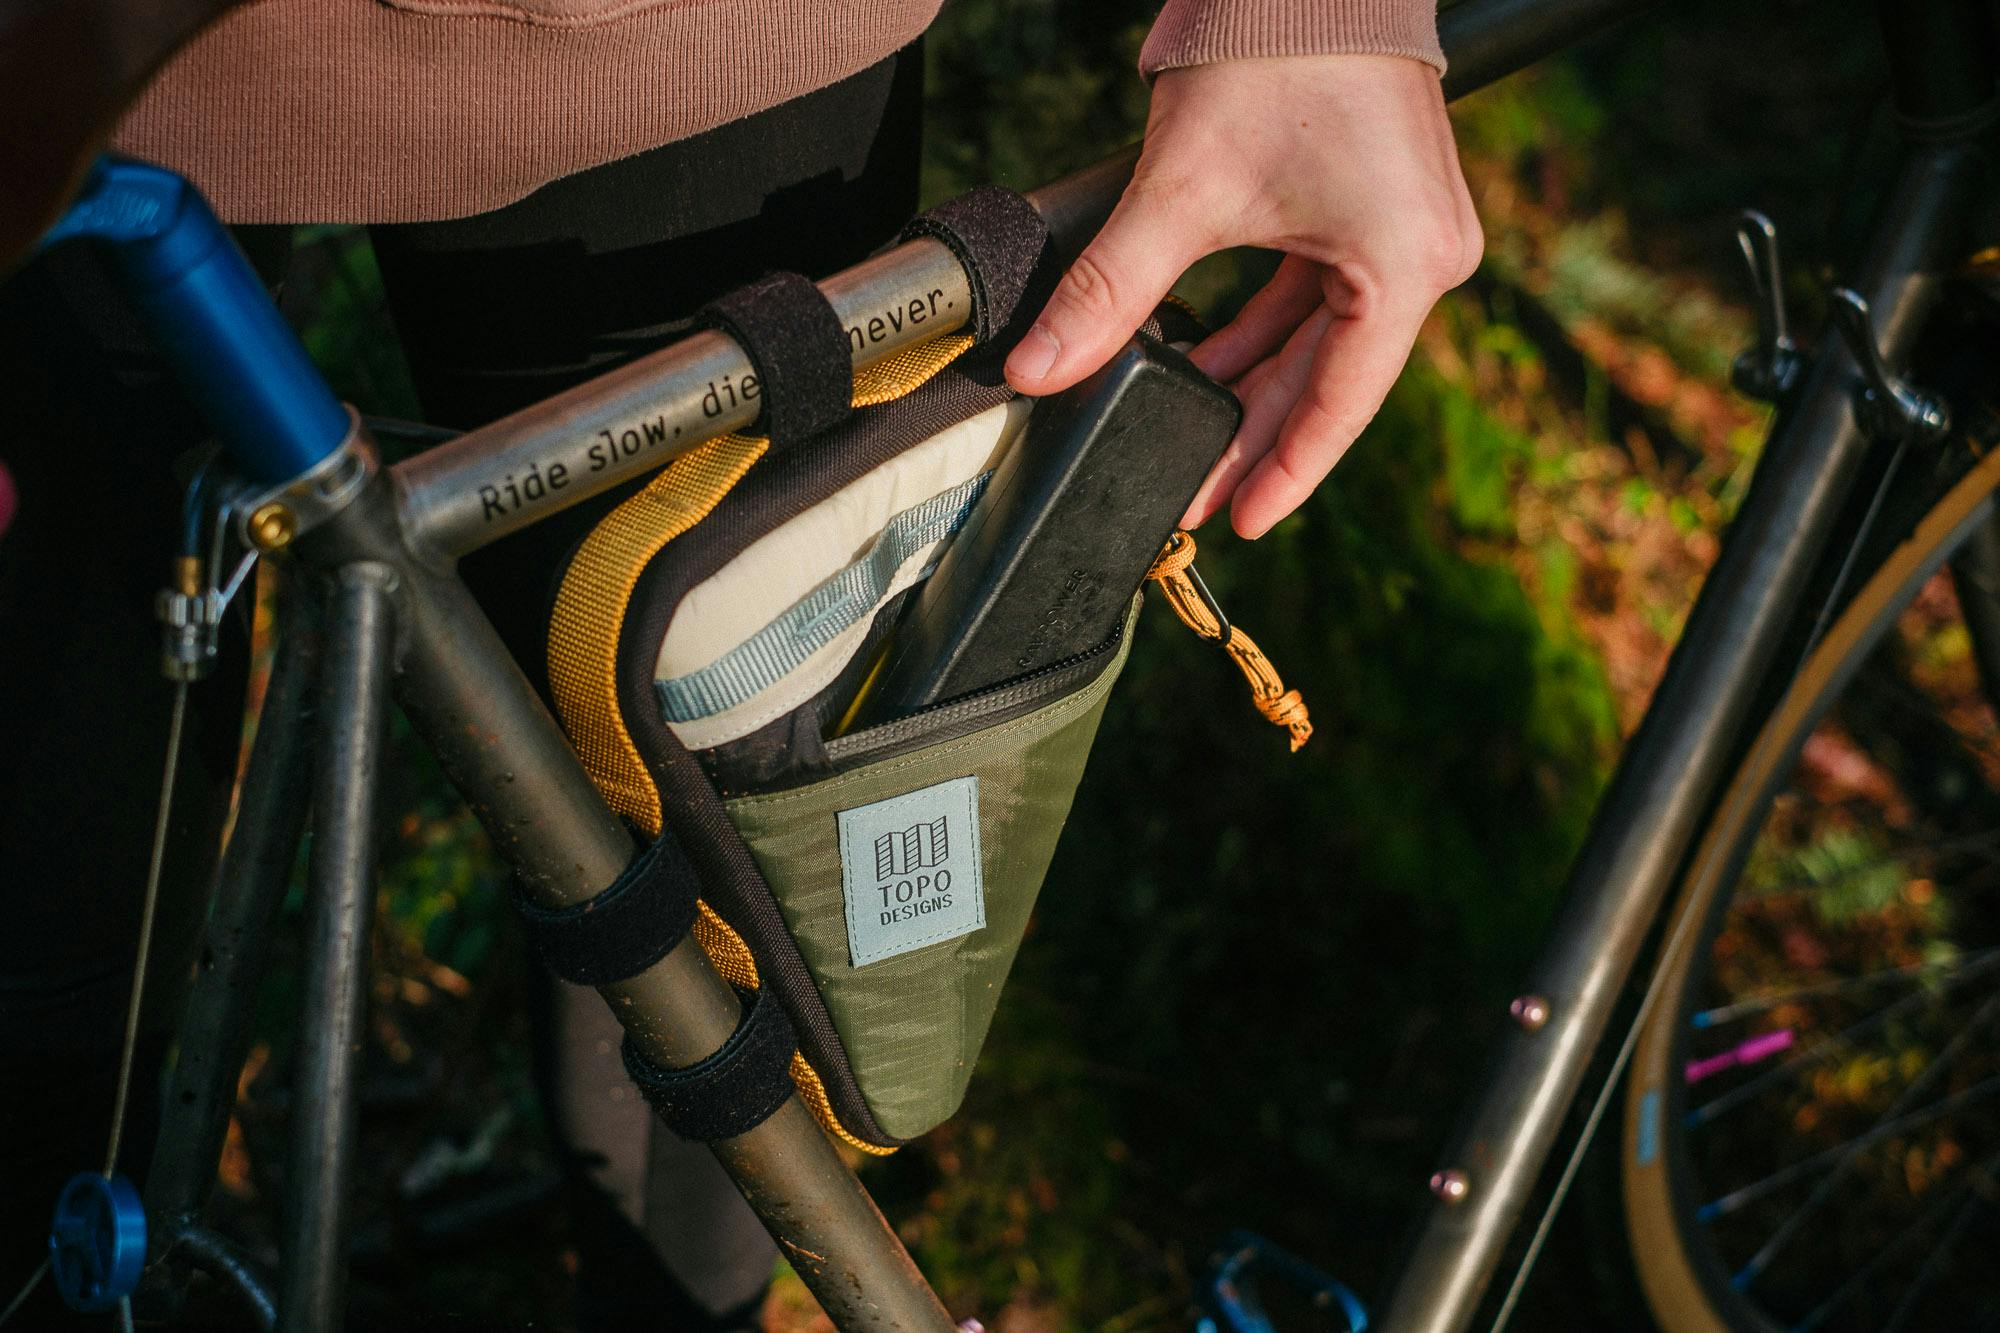 The Topo Designs frame pack perfect for holding your phone.